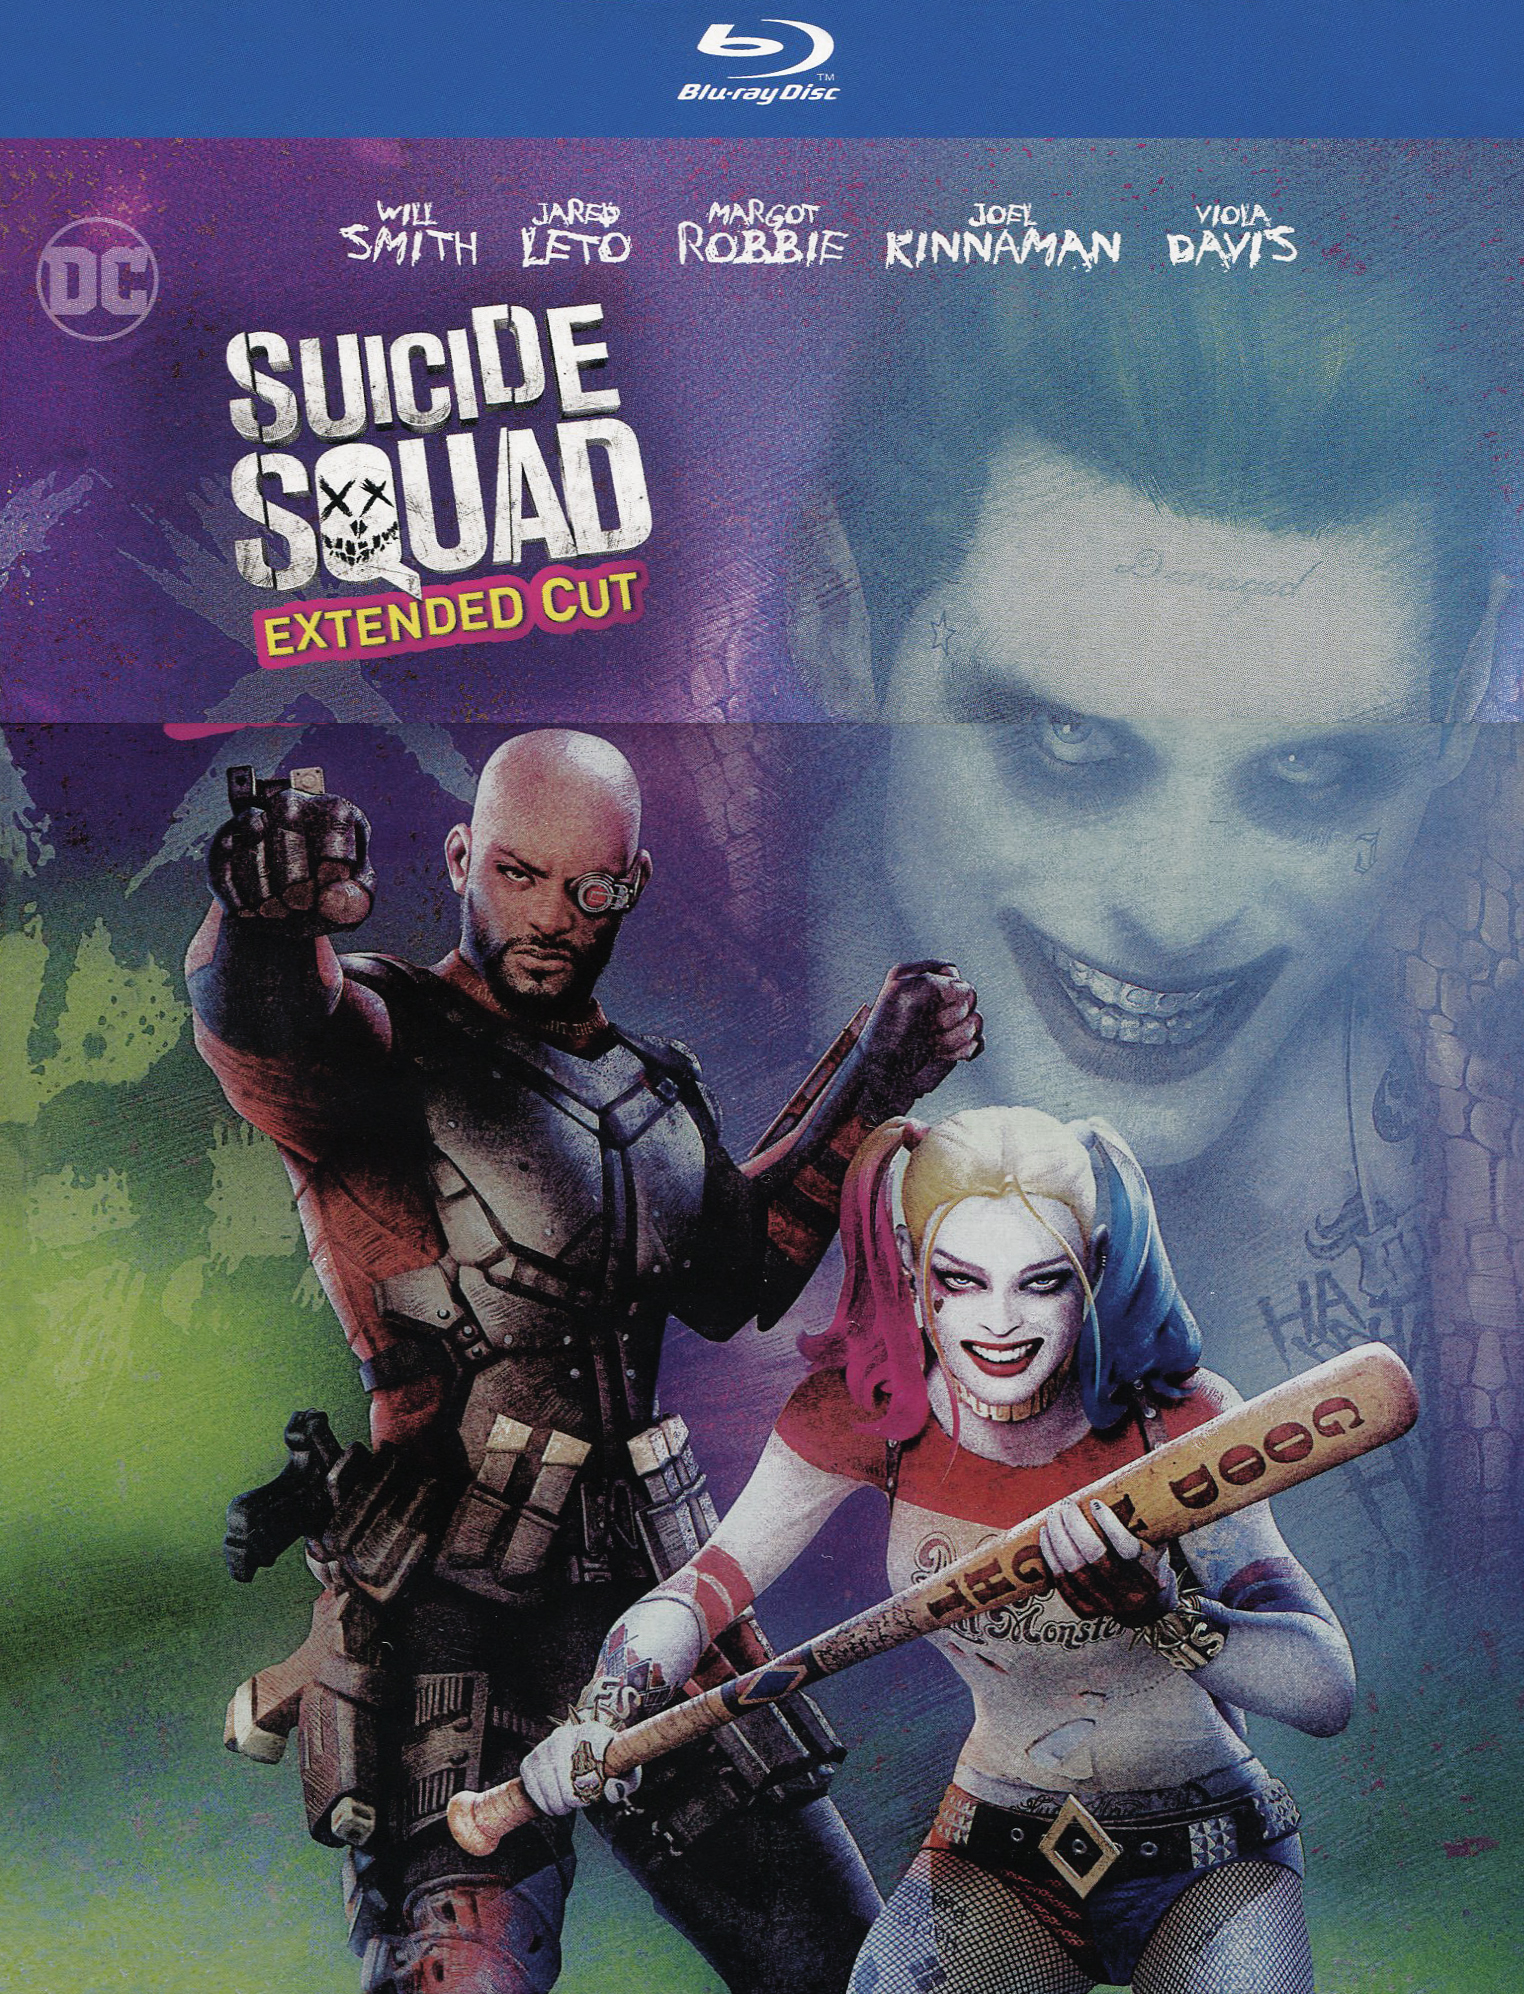 Suicide Squad [Extended Cut] [Blu-ray] [2016]